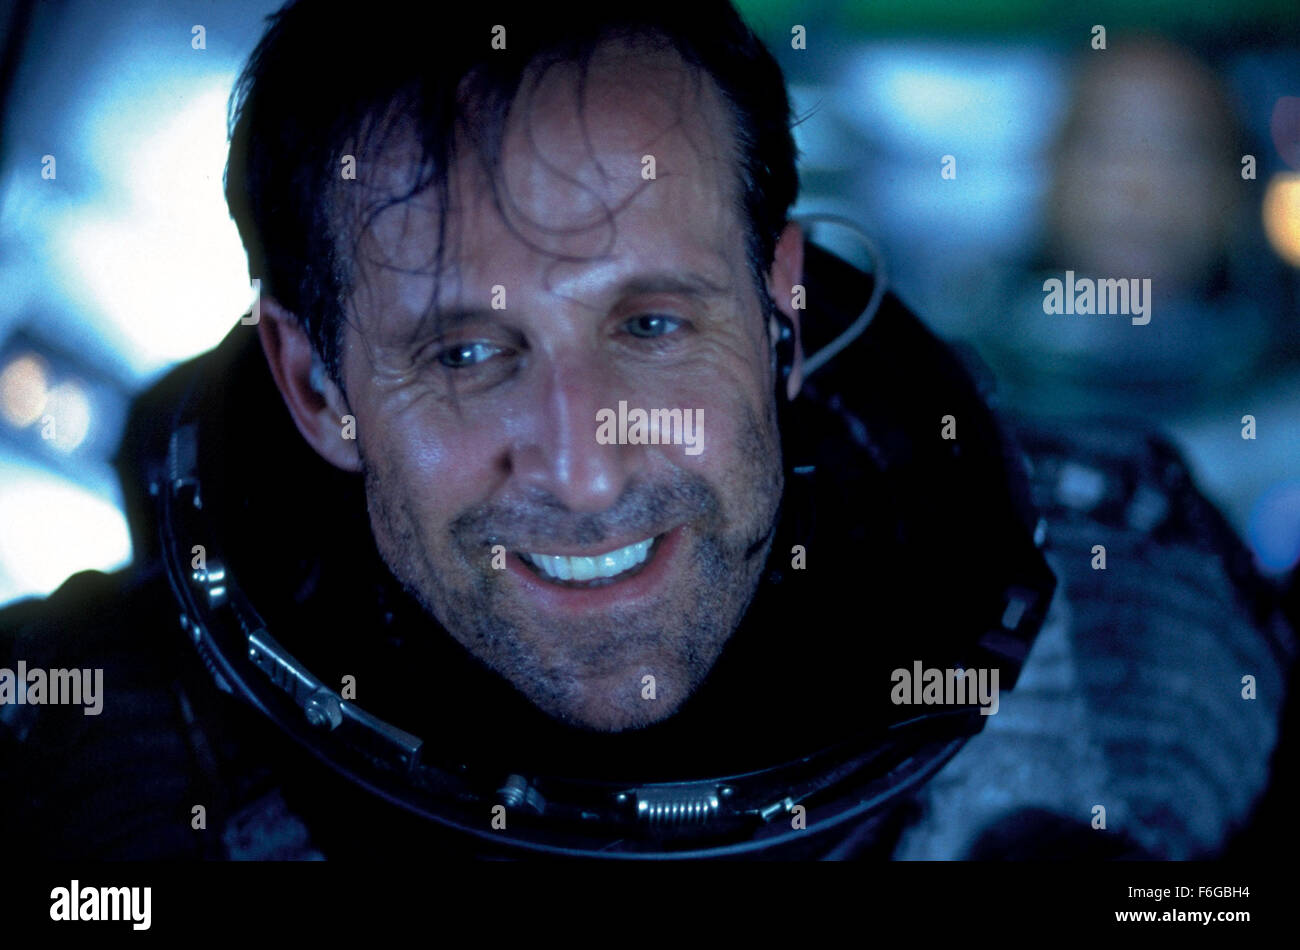 Jul 01, 1998; Houston, TX, USA; PETER STORMARE stars as Lev Andropov, Russian Cosmonaut in the thrilling action/sci-fi film 'Armageddon' directed by Michael Bay. Stock Photo